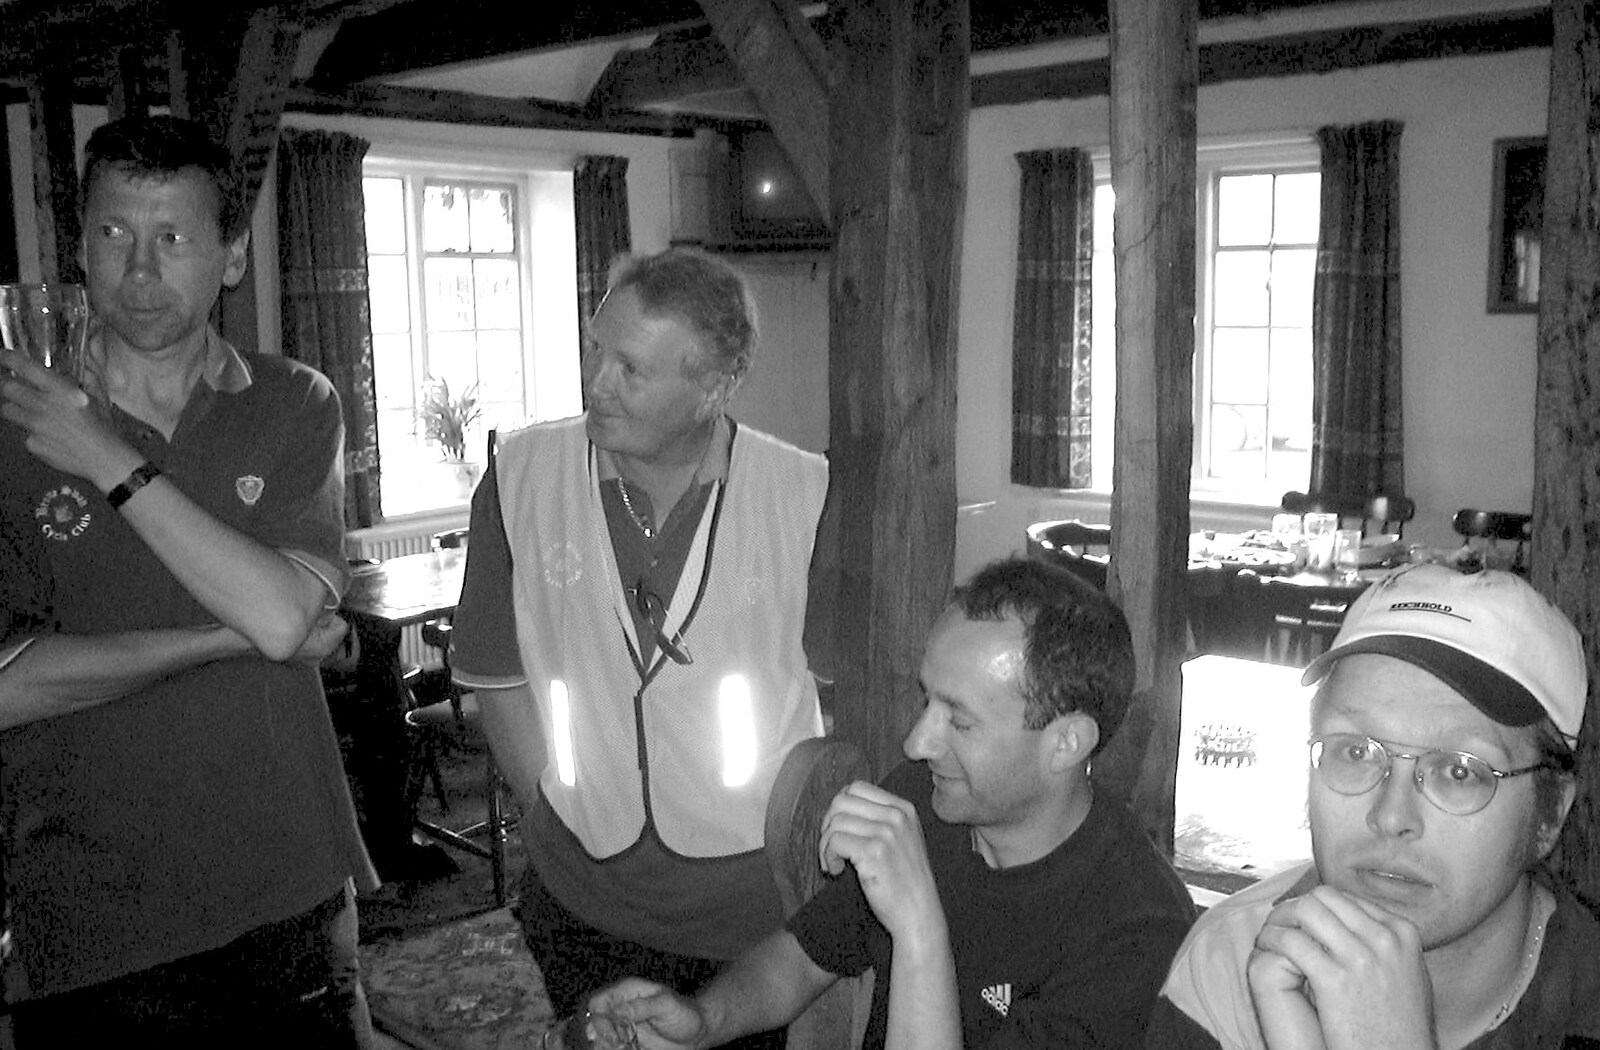 The BSCC in a pub somewhere from The BSCC Annual Bike Ride, Marquess of Exeter, Oakham, Rutland - 12th May 2001